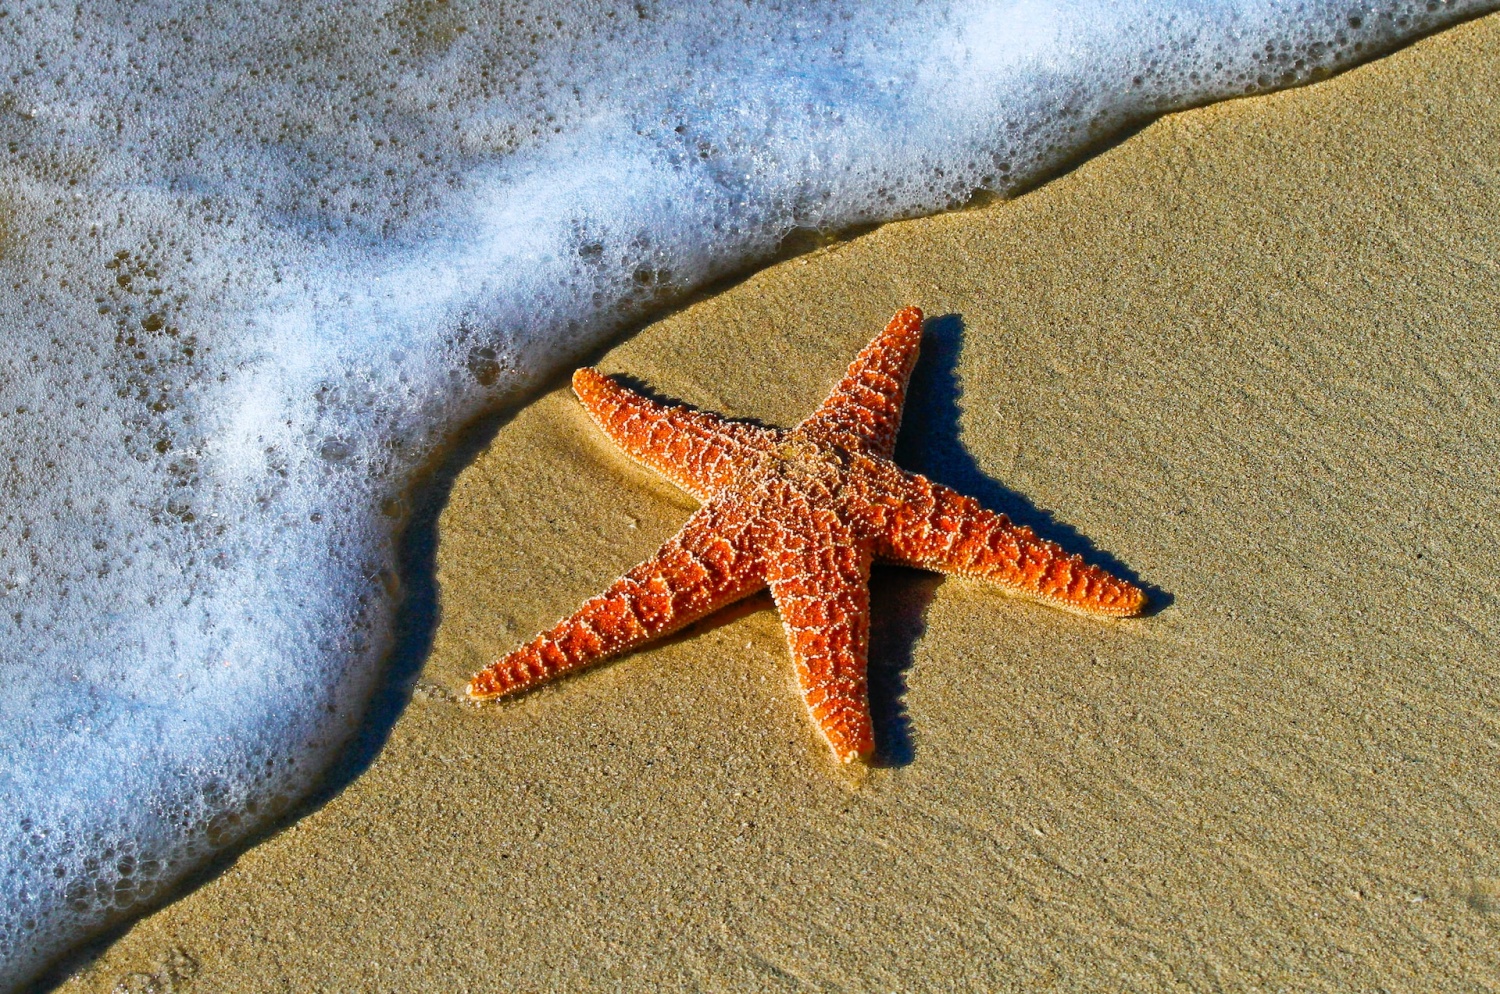 Large starfish spotted along beach in Port Aransas, Texas